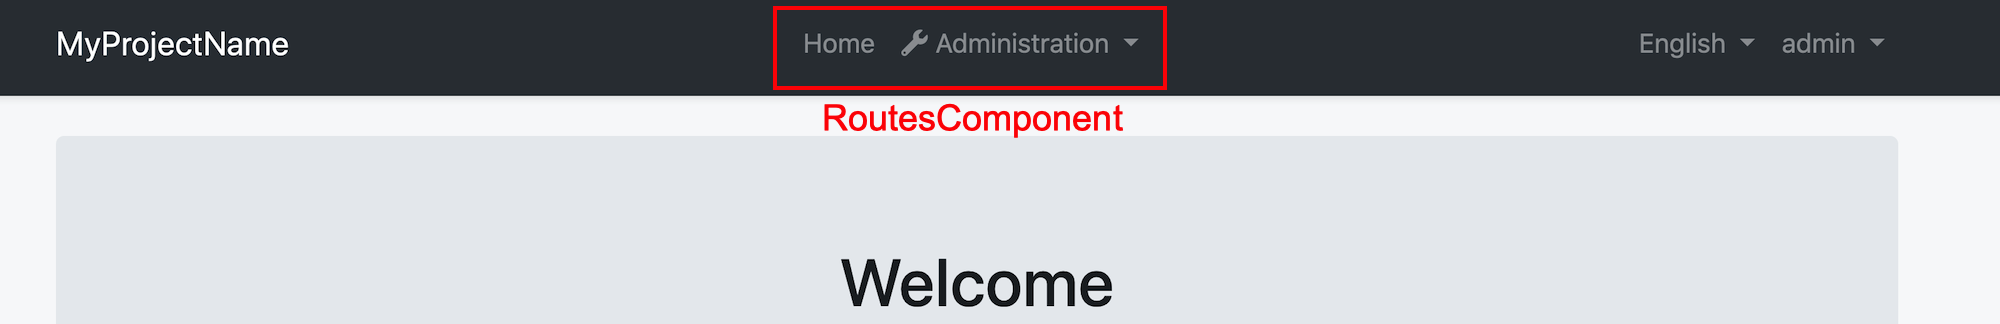 RoutesComponent